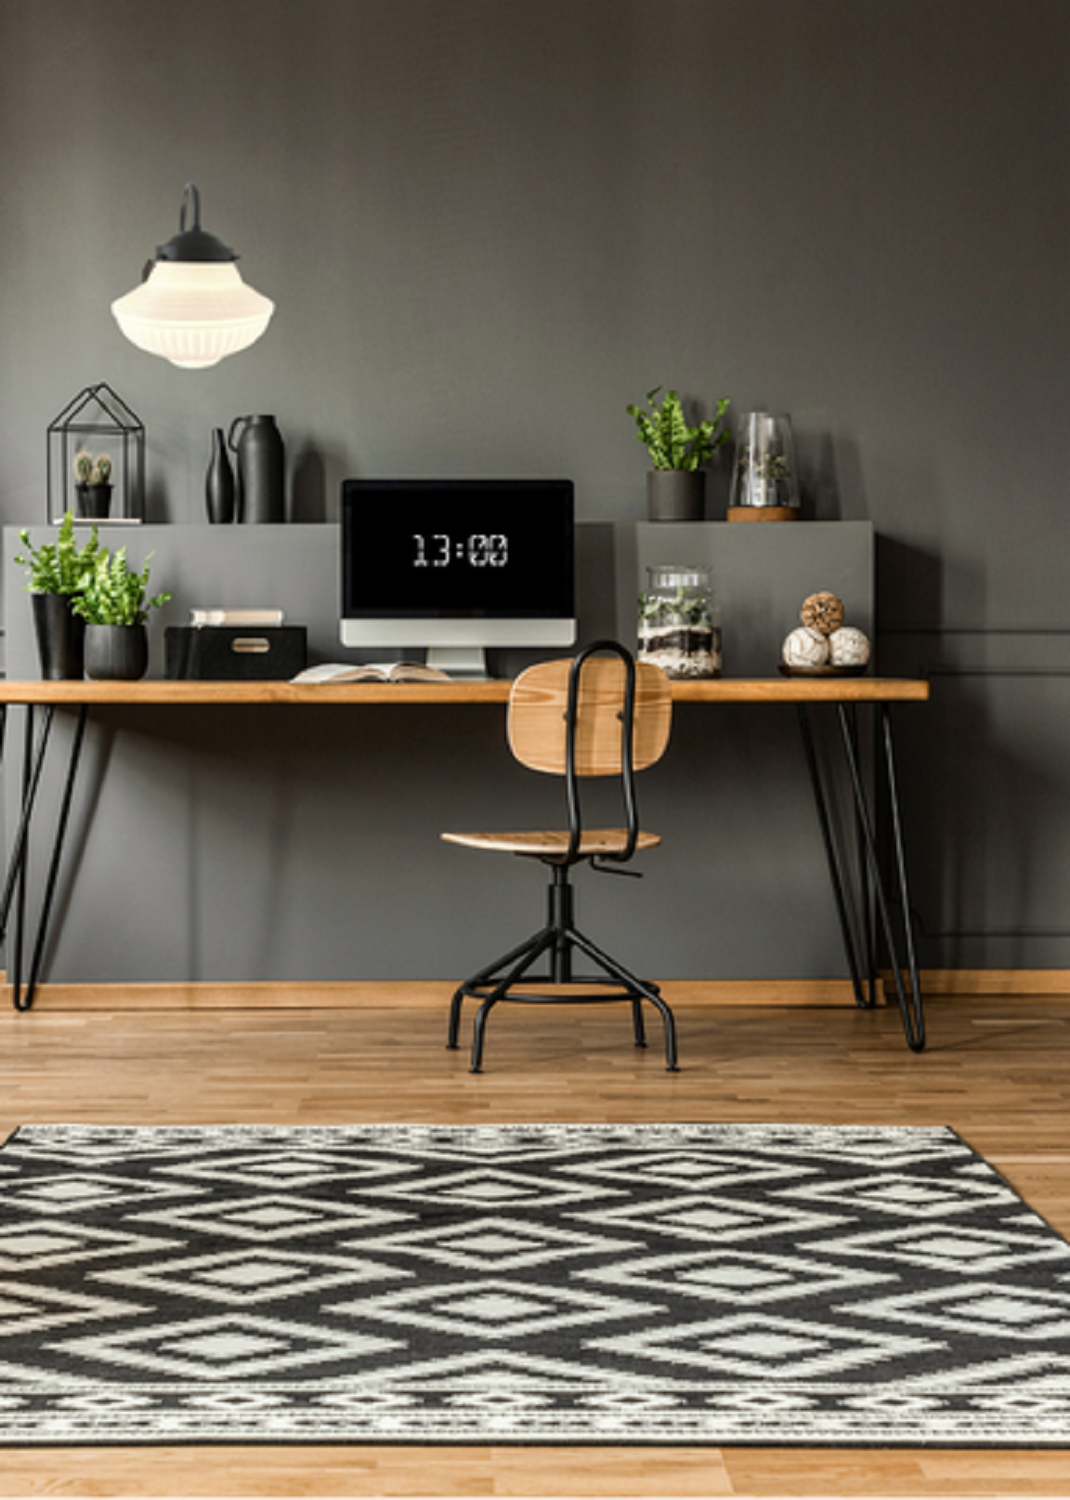 Cubicle Decor Ideas To Improve Your Work Environment